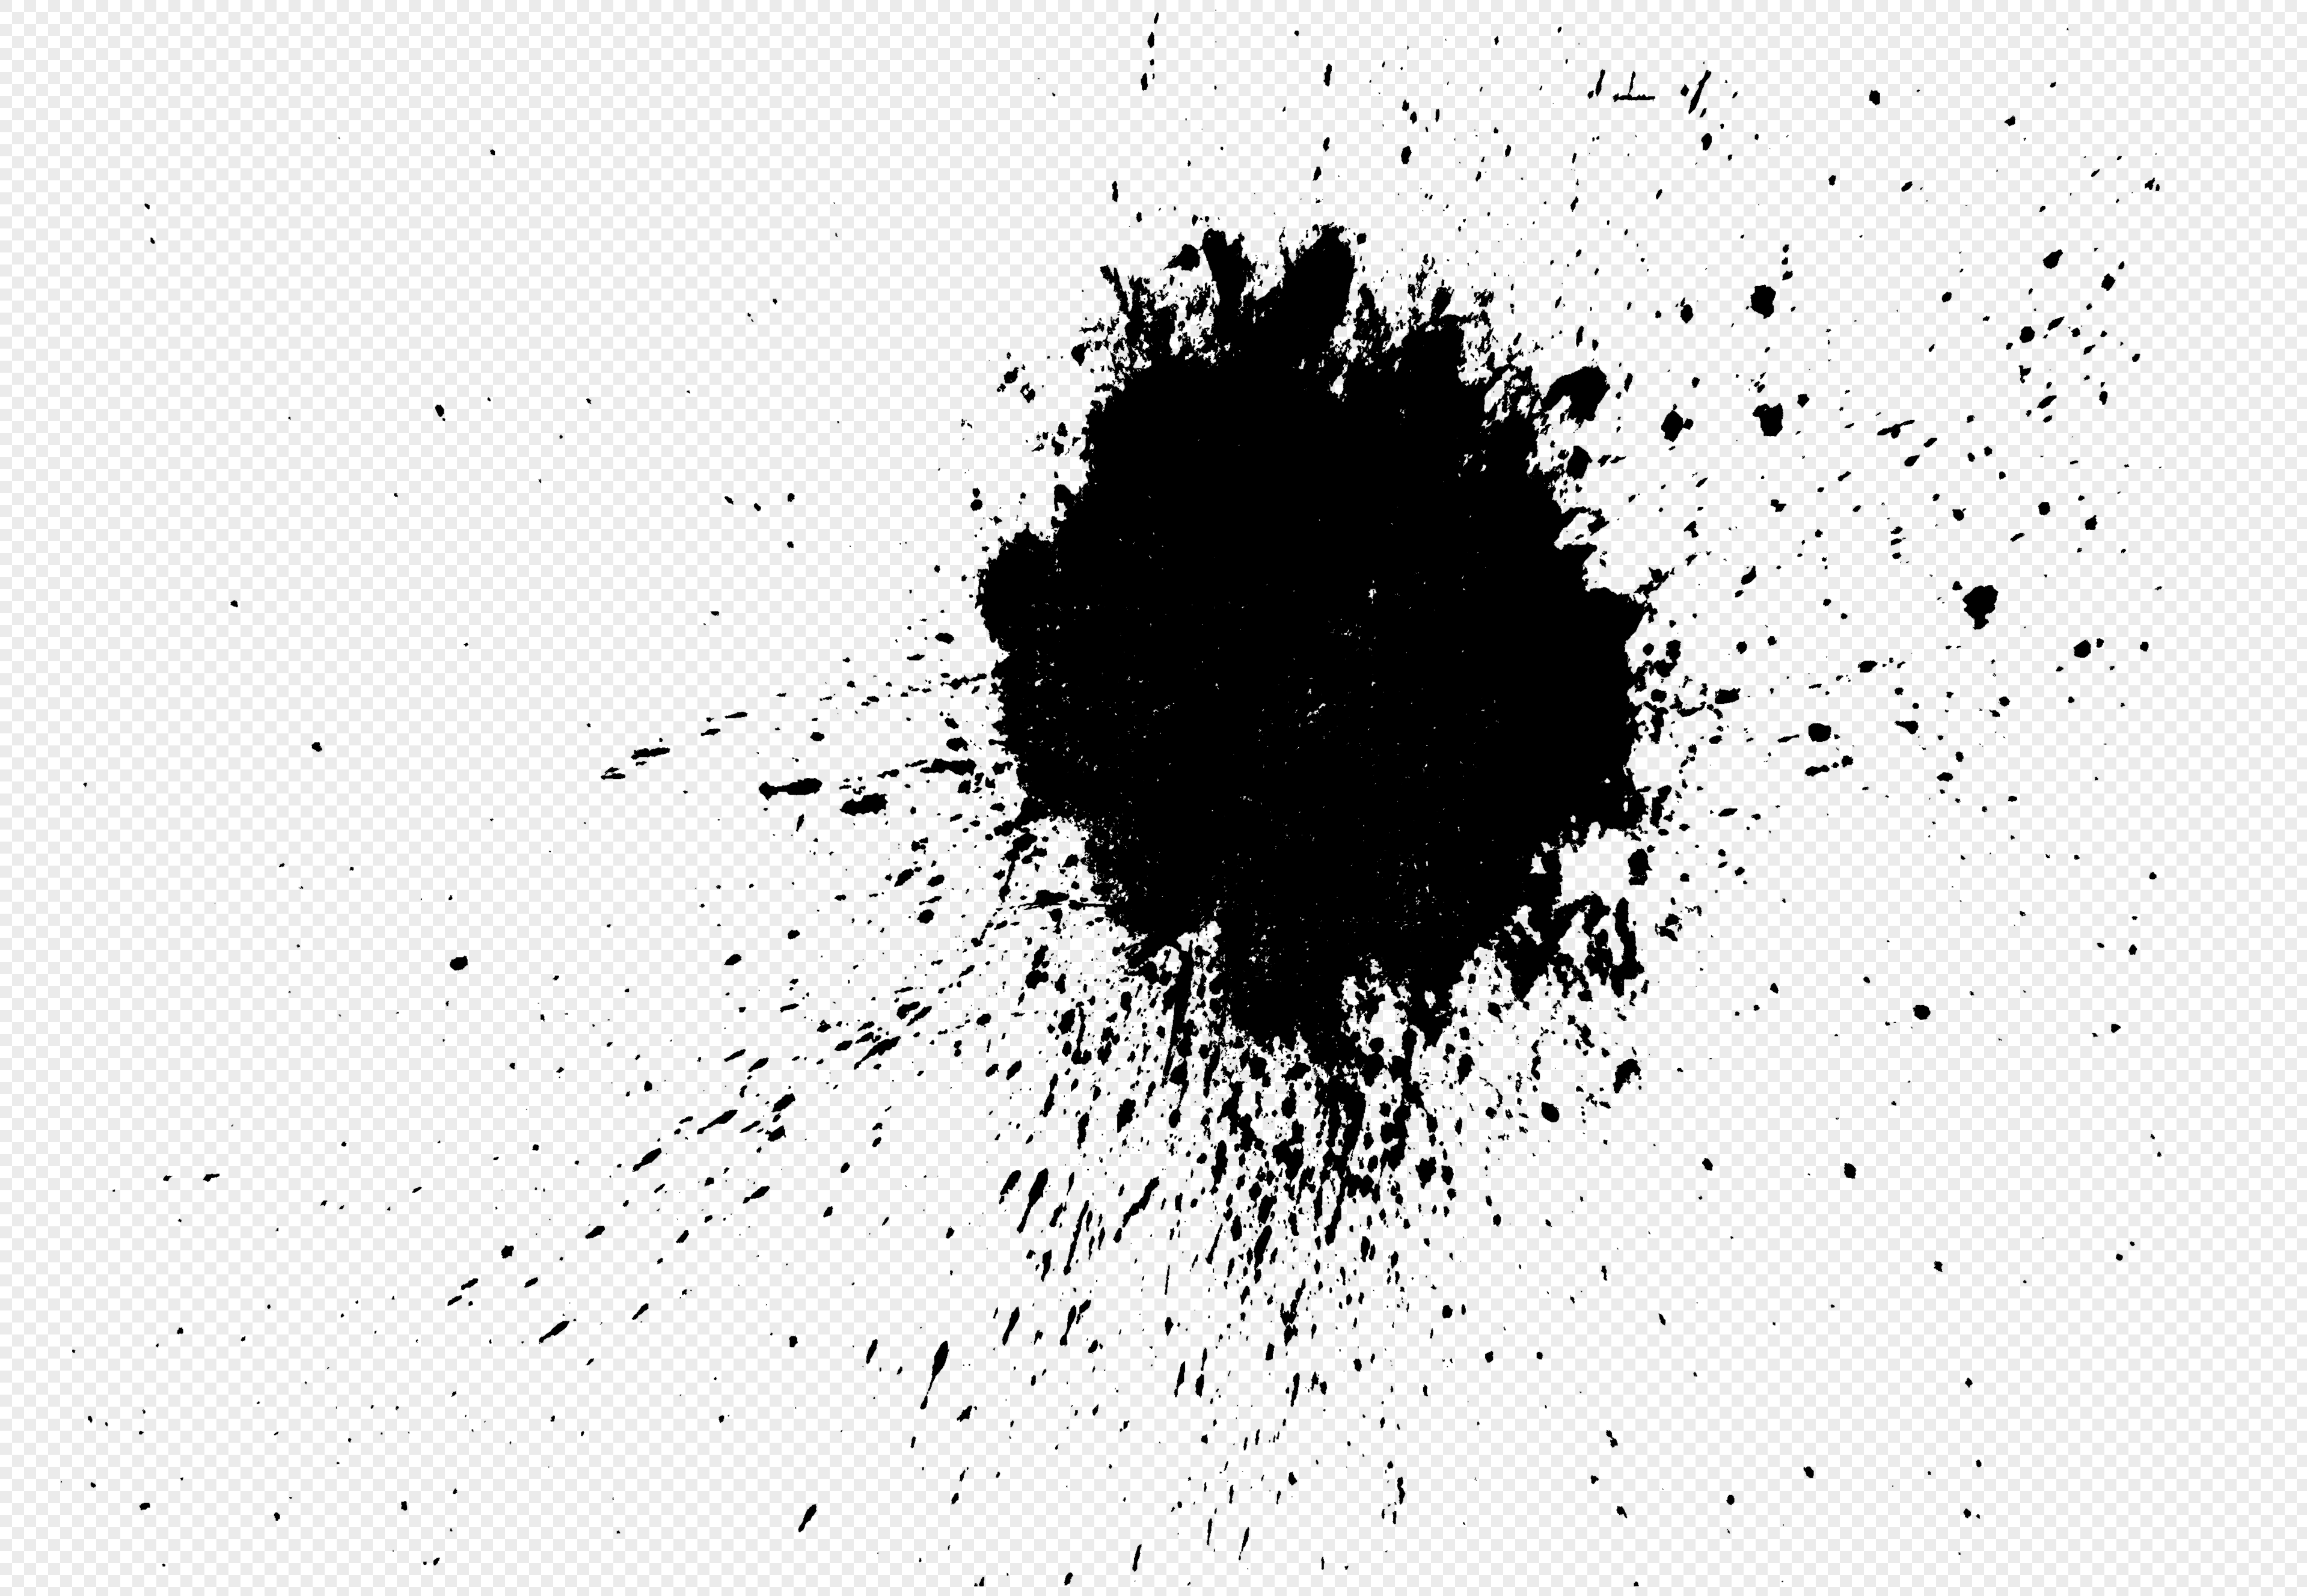 Splash Ink PNG Transparent Background And Clipart Image For Free ...